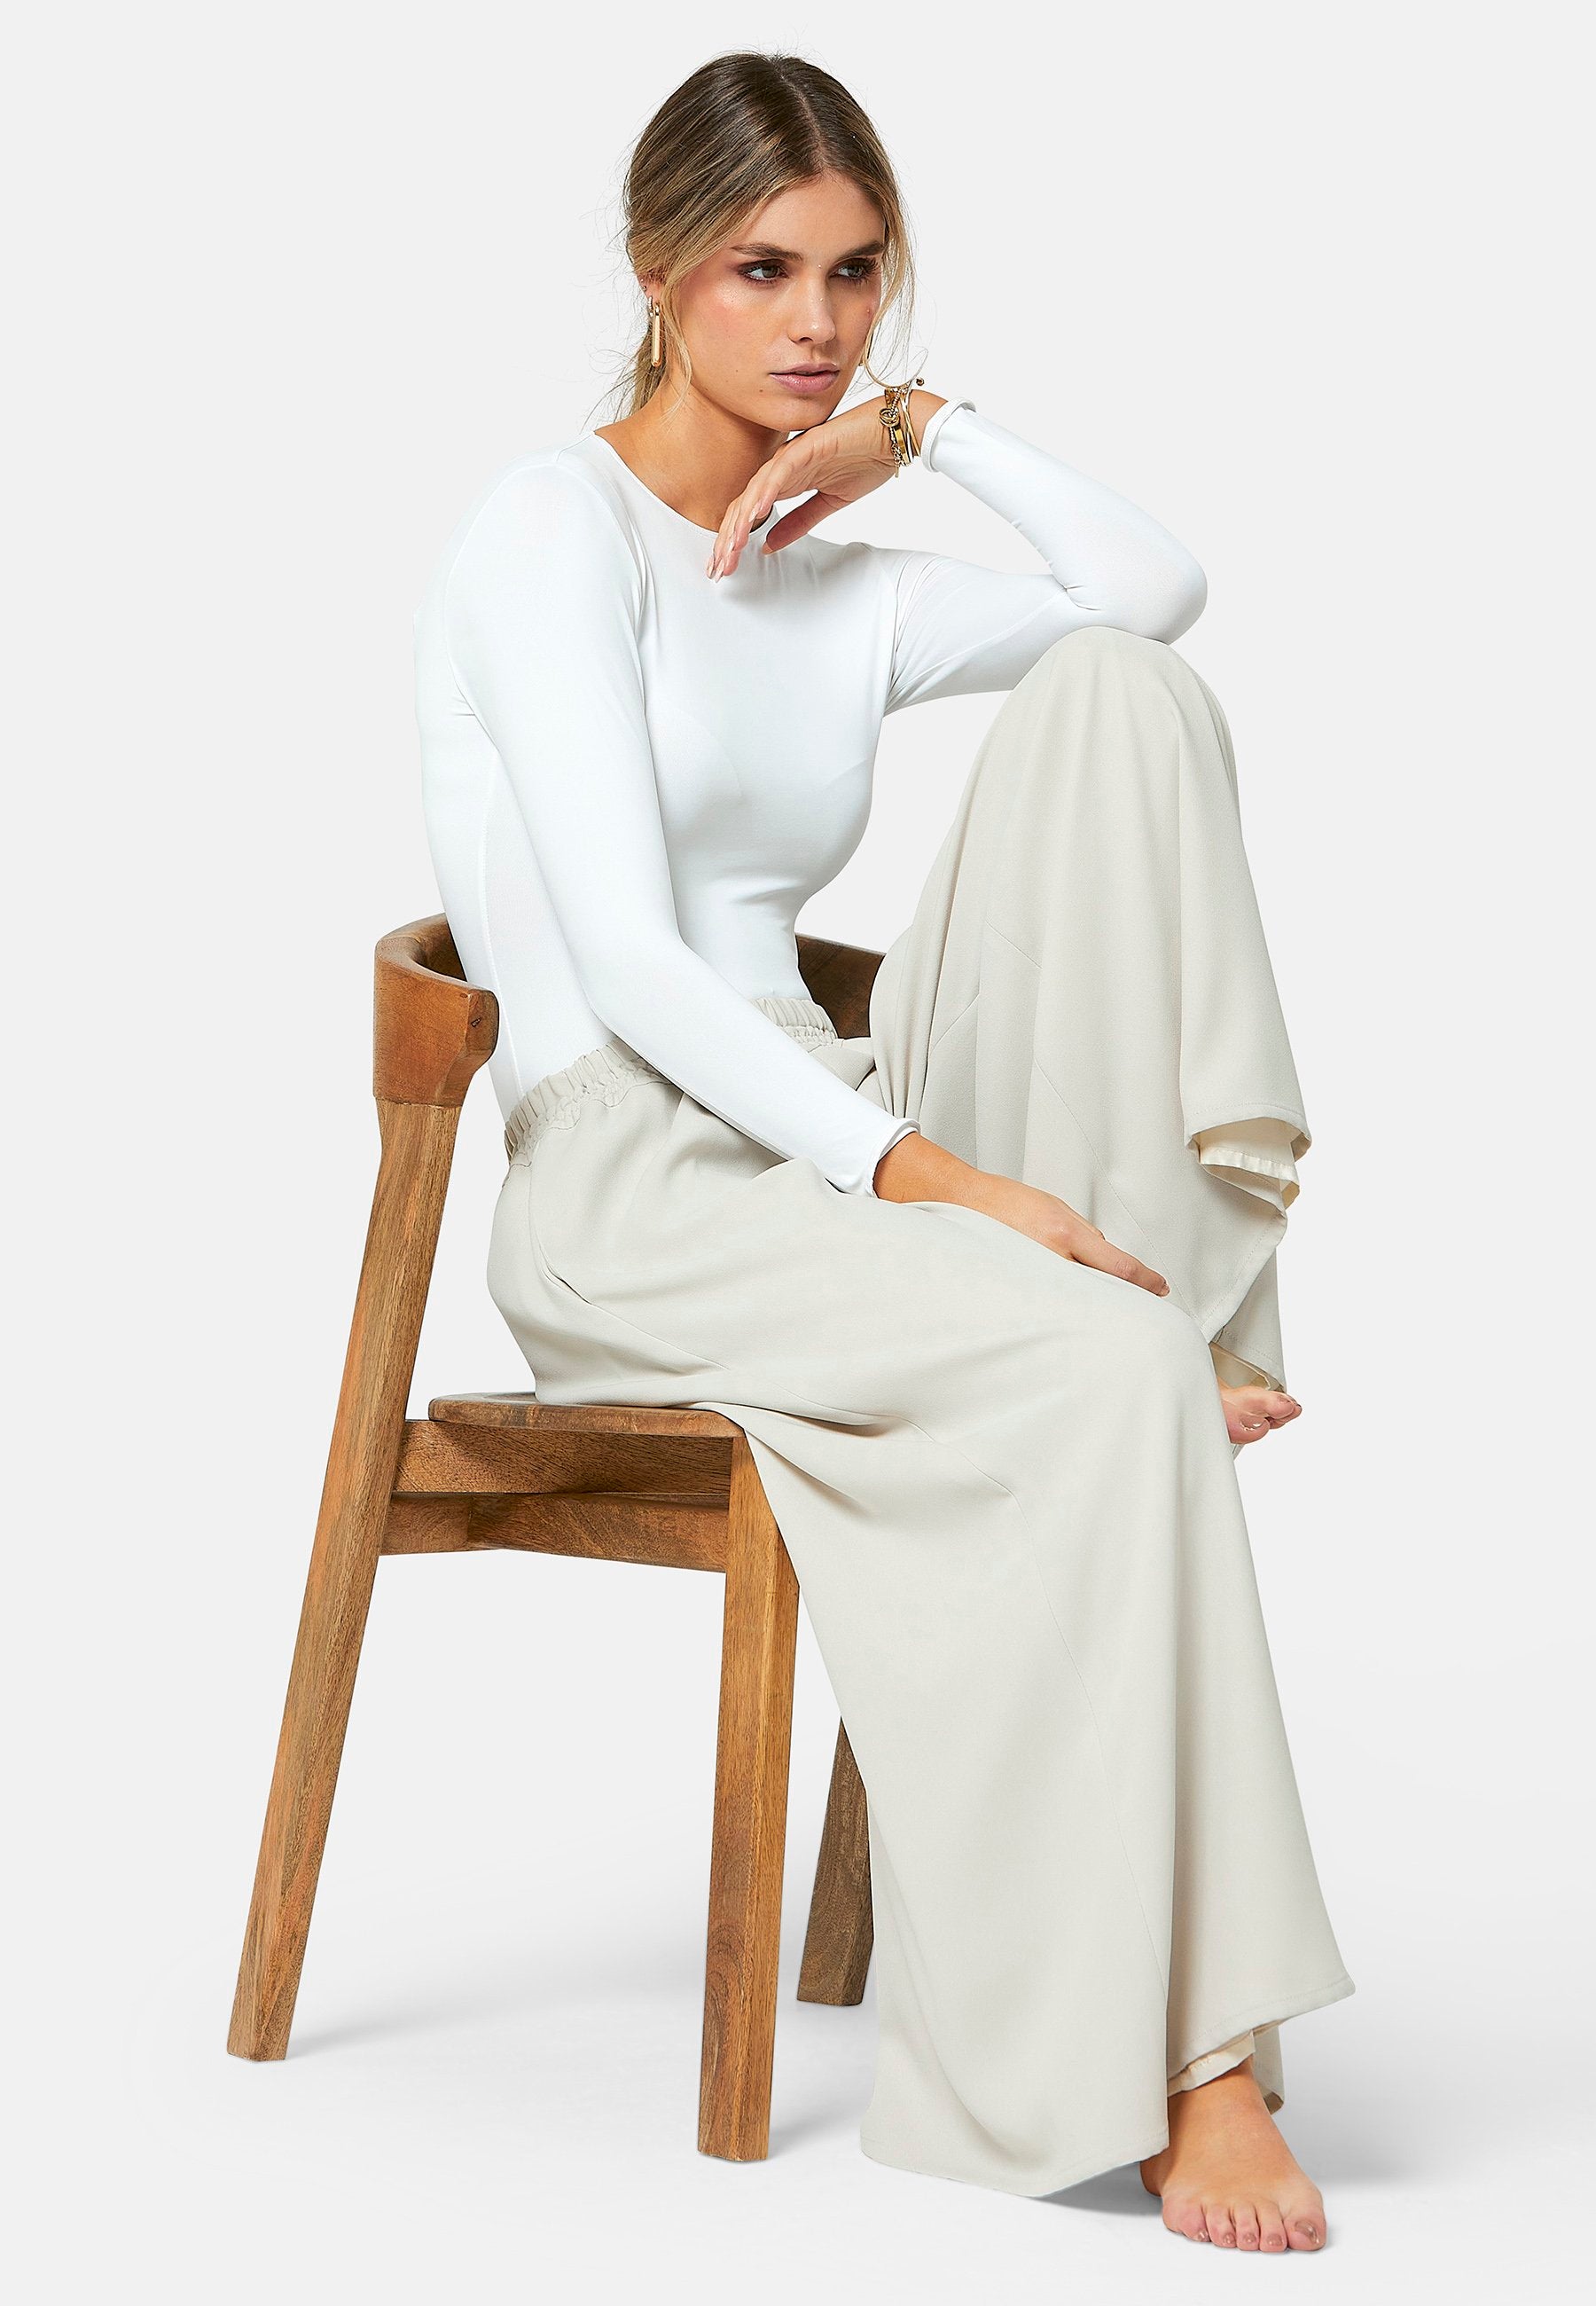 Imogen, Stone culottes in a fluid satin back crepe. Feature a flowy wide-leg, elasticated waistband and side pockets. A relaxed yet dressy look. Coordinate with white timeless tops and matching Lydiah trench for a complete outfit.